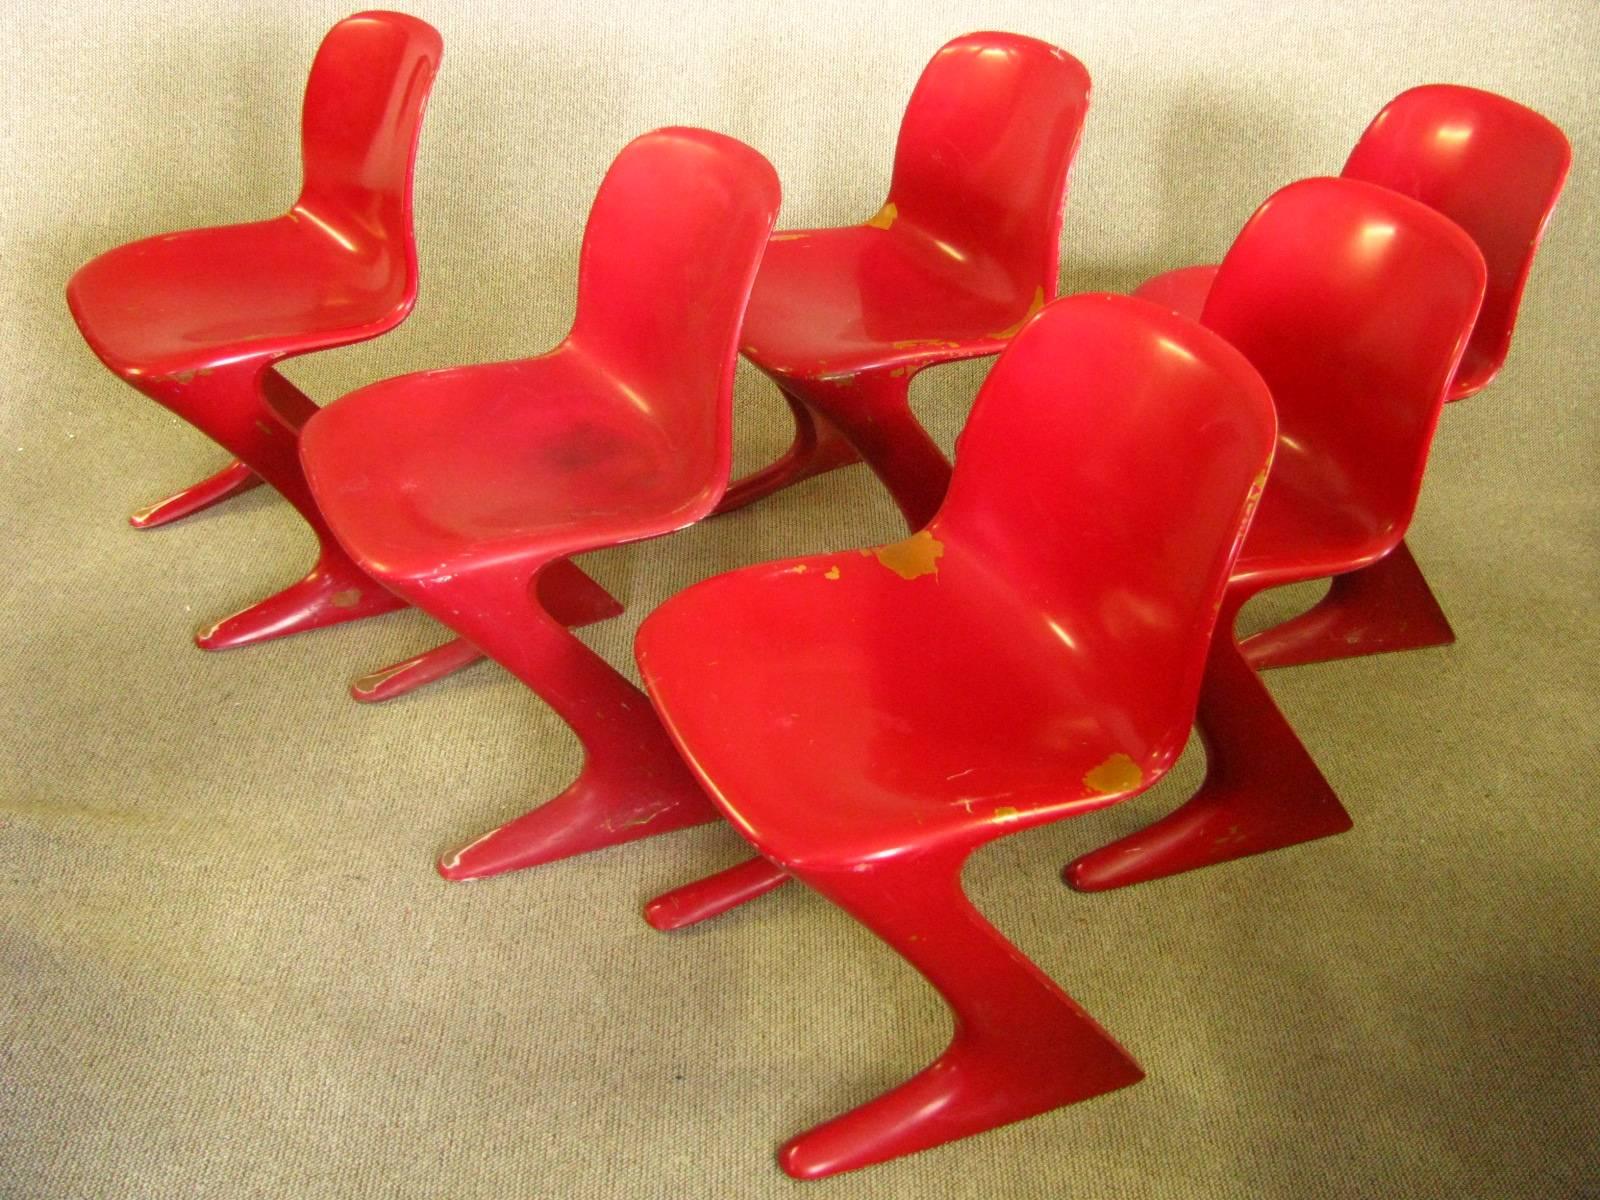 Set of Six Midcentury German dining chairs, Ernst Moeckel, 1968

So called Z-chair. Designed 1968 in the GDR by Ernst Moeckl (1931) and Siegfried Mehl, German Version of the Panton chair. Also called kangoroo chair or variopur chair. Produced